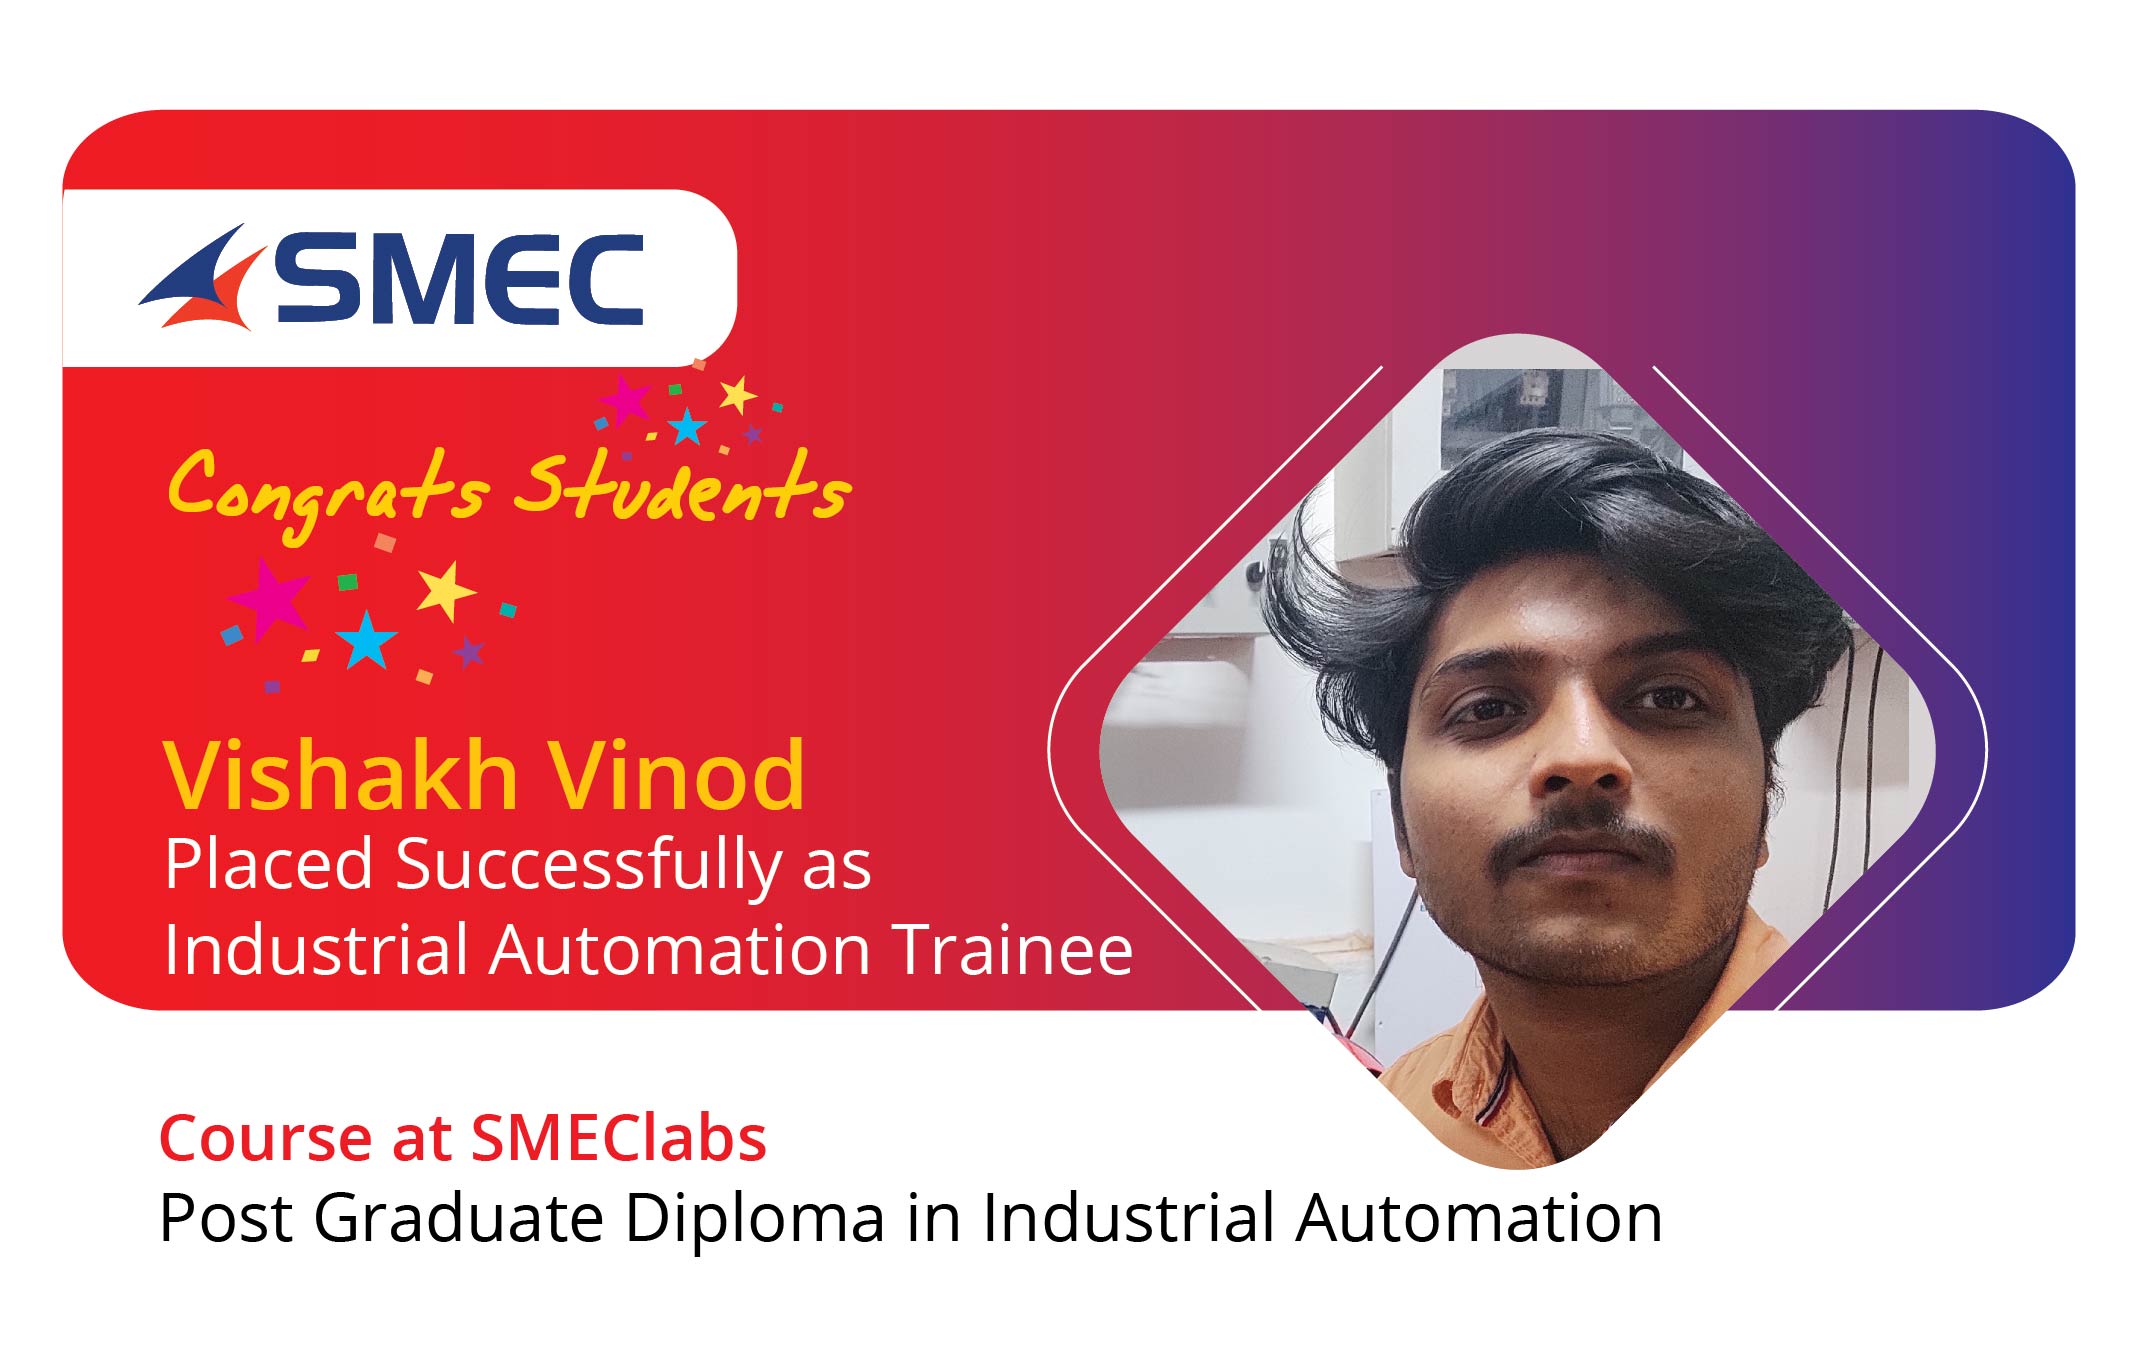 SMEC placed successfully as Industrial Automation Trainee